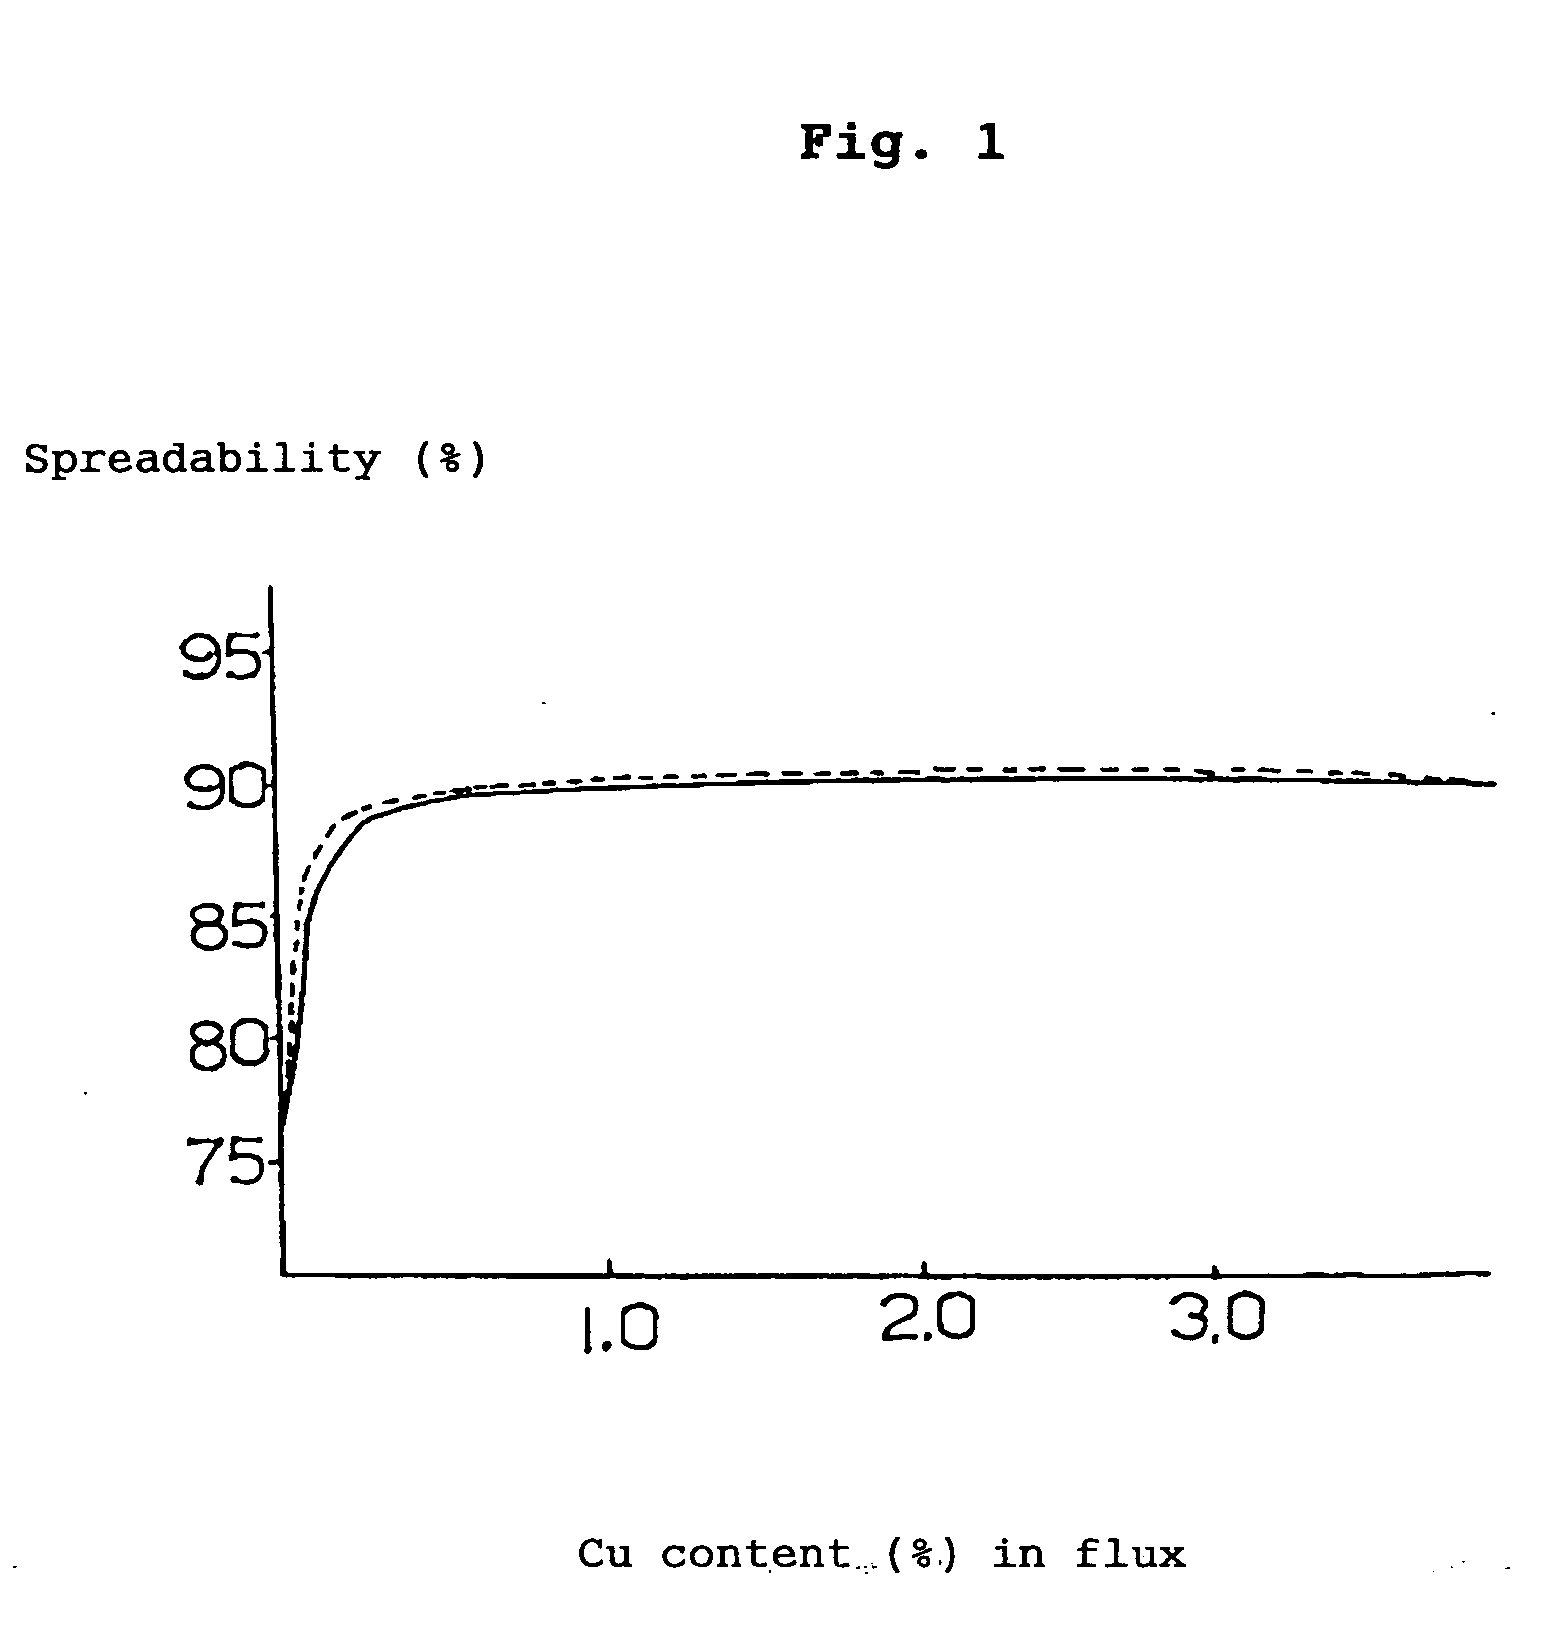 Preflux, flux, solder paste and method of manufacturing lead-free soldered body